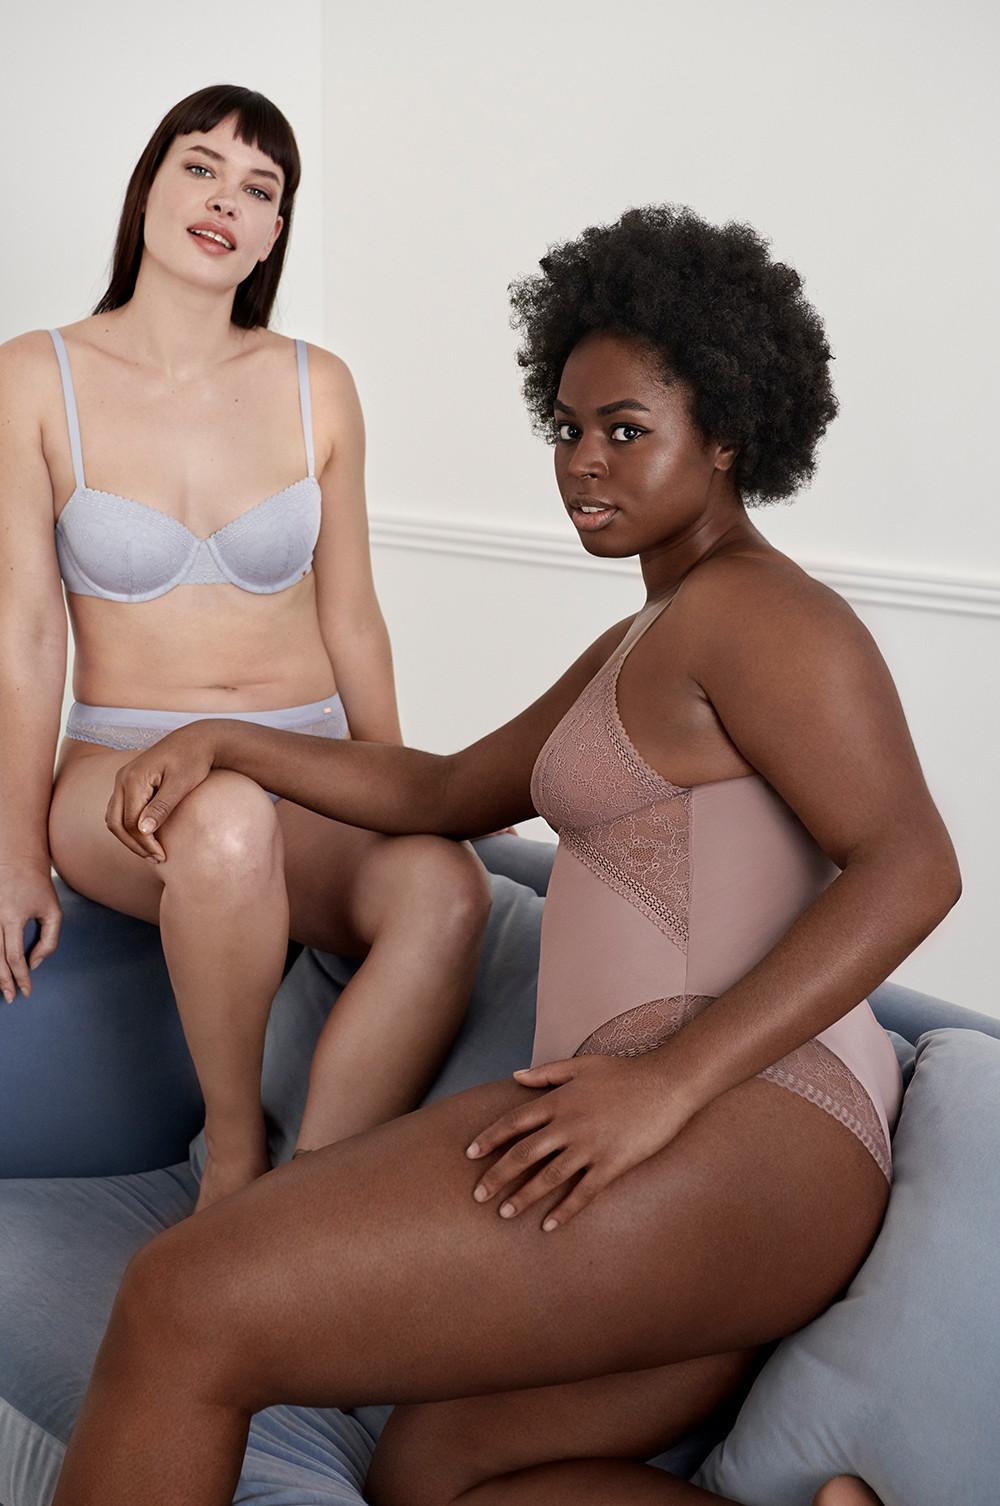 Primark Women's Bras and Briefs New Collection - February 2022 